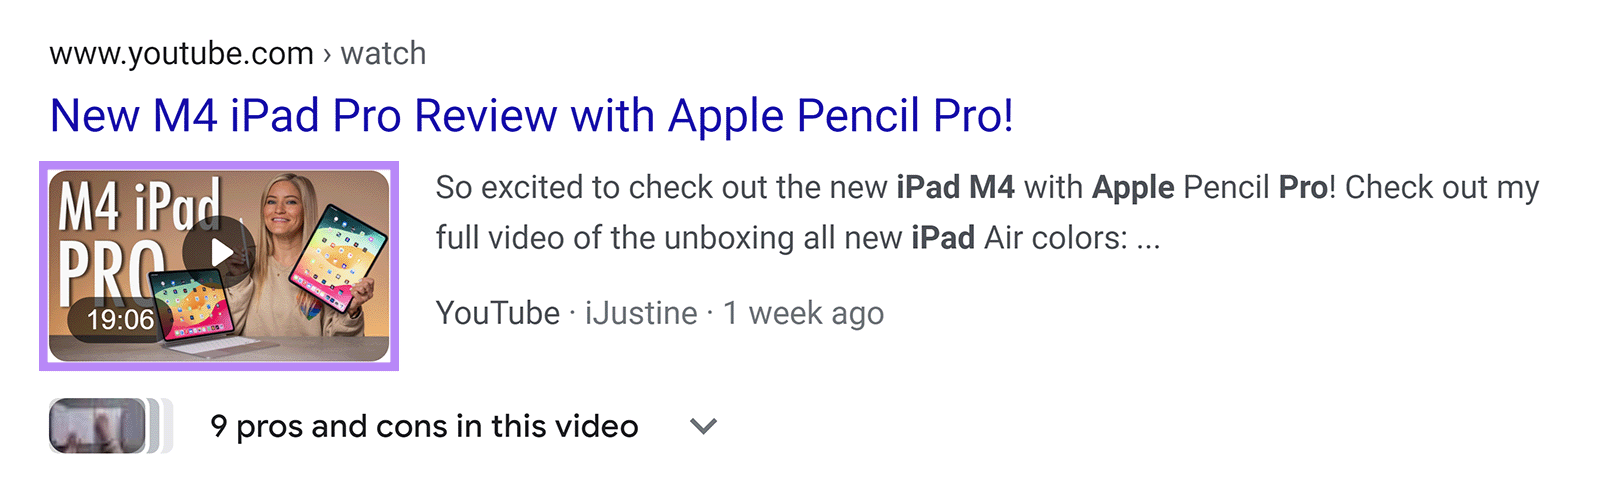 Google search result for iPad Pro Review showing catchy thumbnail by iJustine.